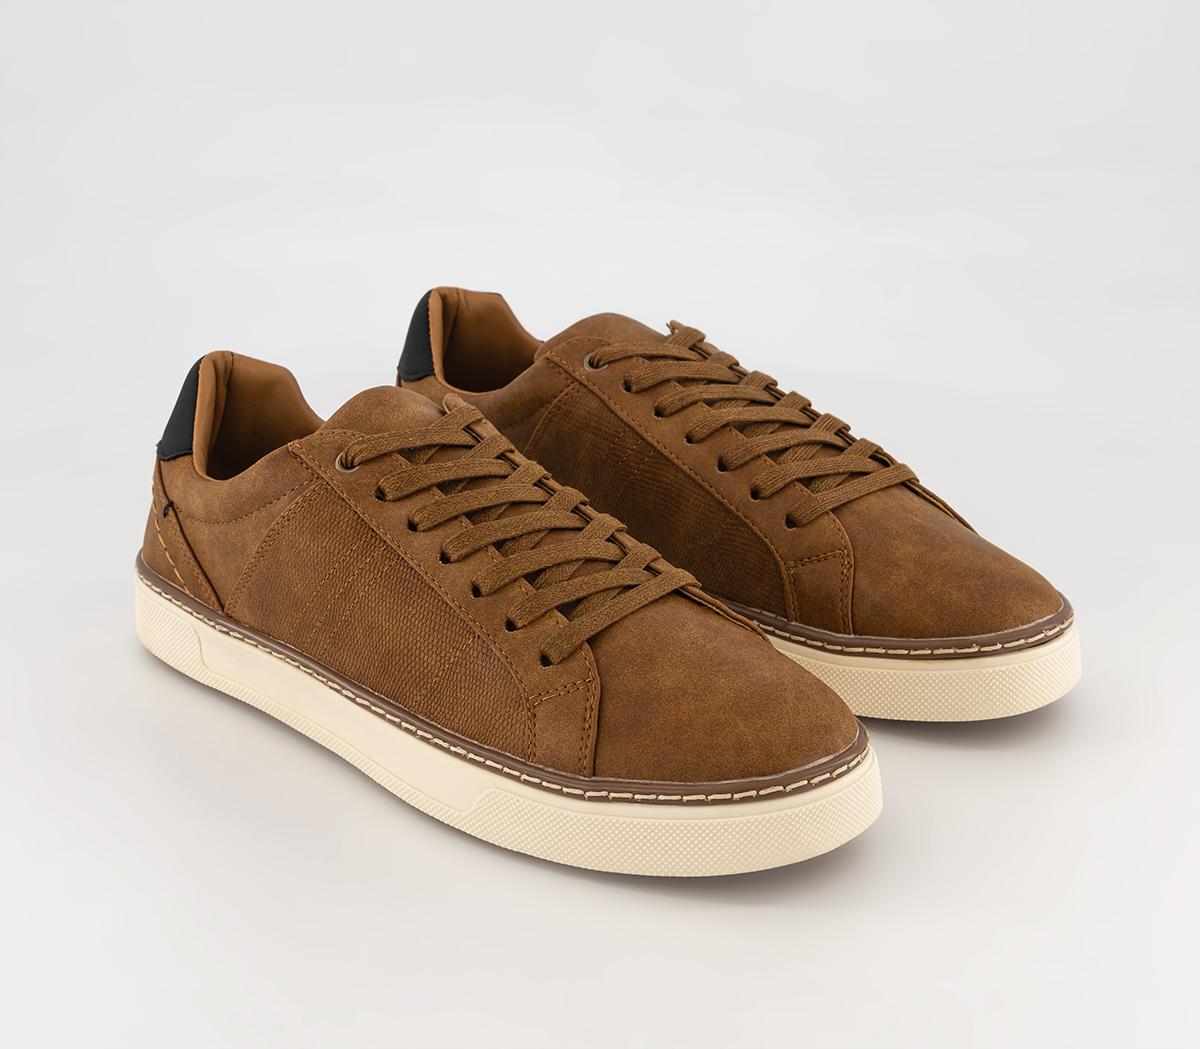 OFFICE Mens Calvert Rand Lace To Toe Sneakers Tan Brown, 6